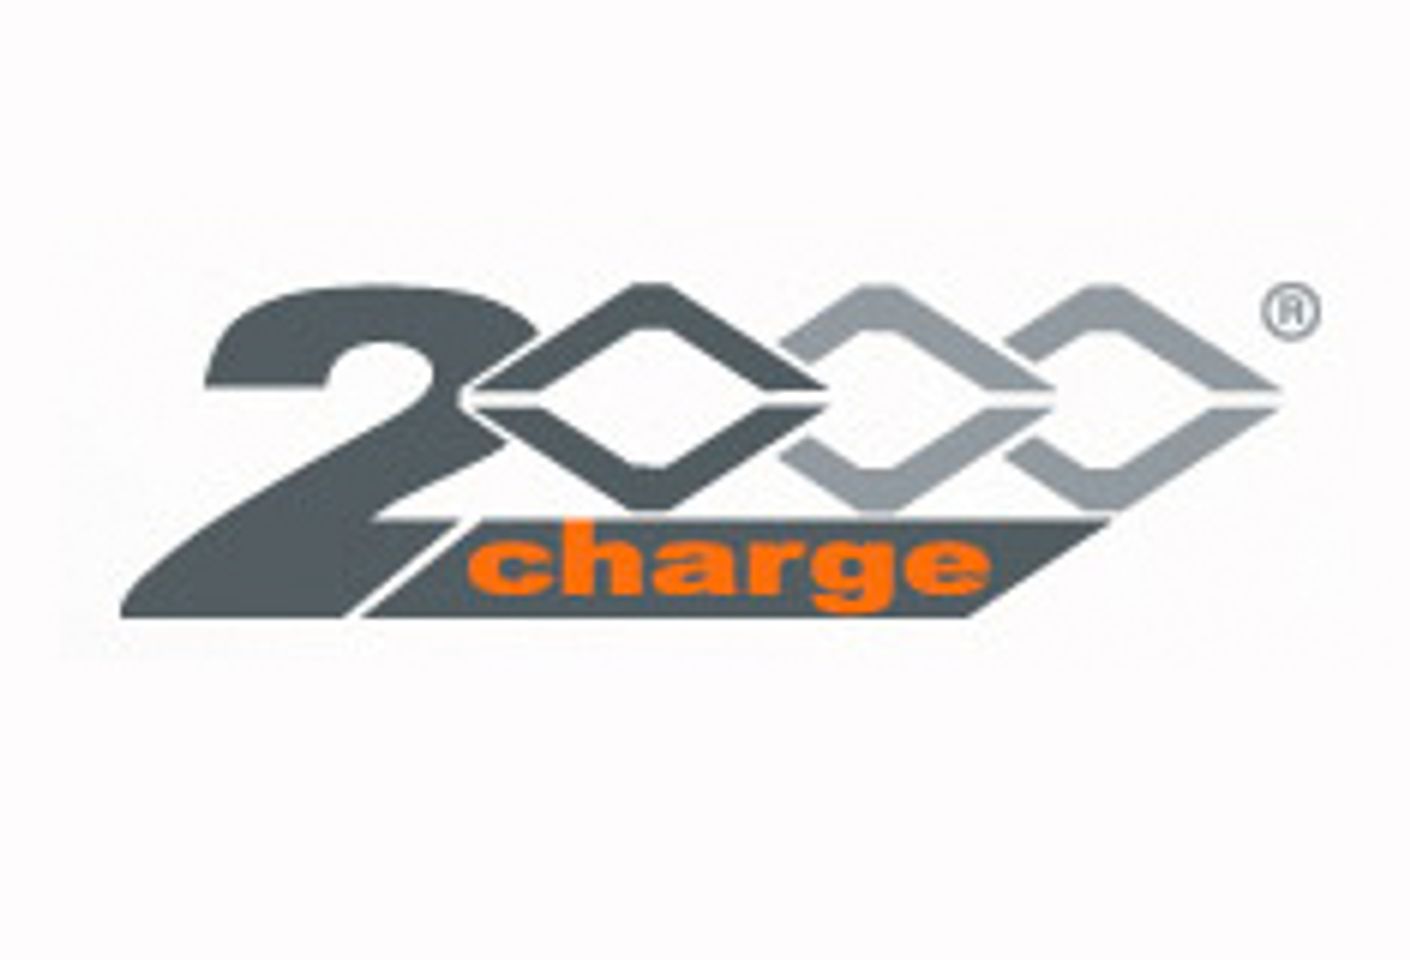 2000Charge to Run Cash Giveaway Contest in Miami